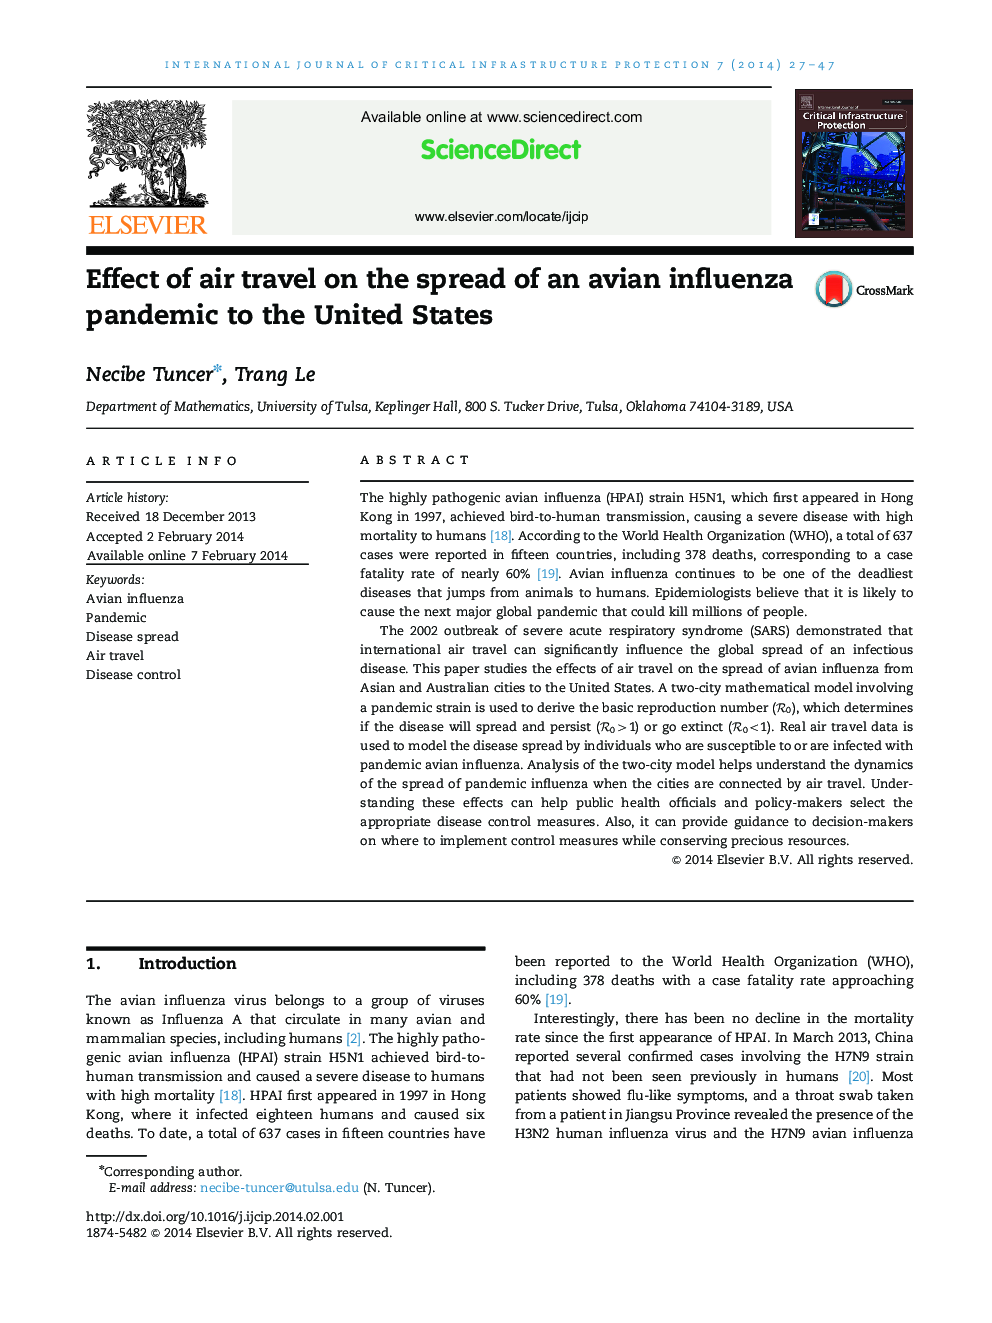 Effect of air travel on the spread of an avian influenza pandemic to the United States